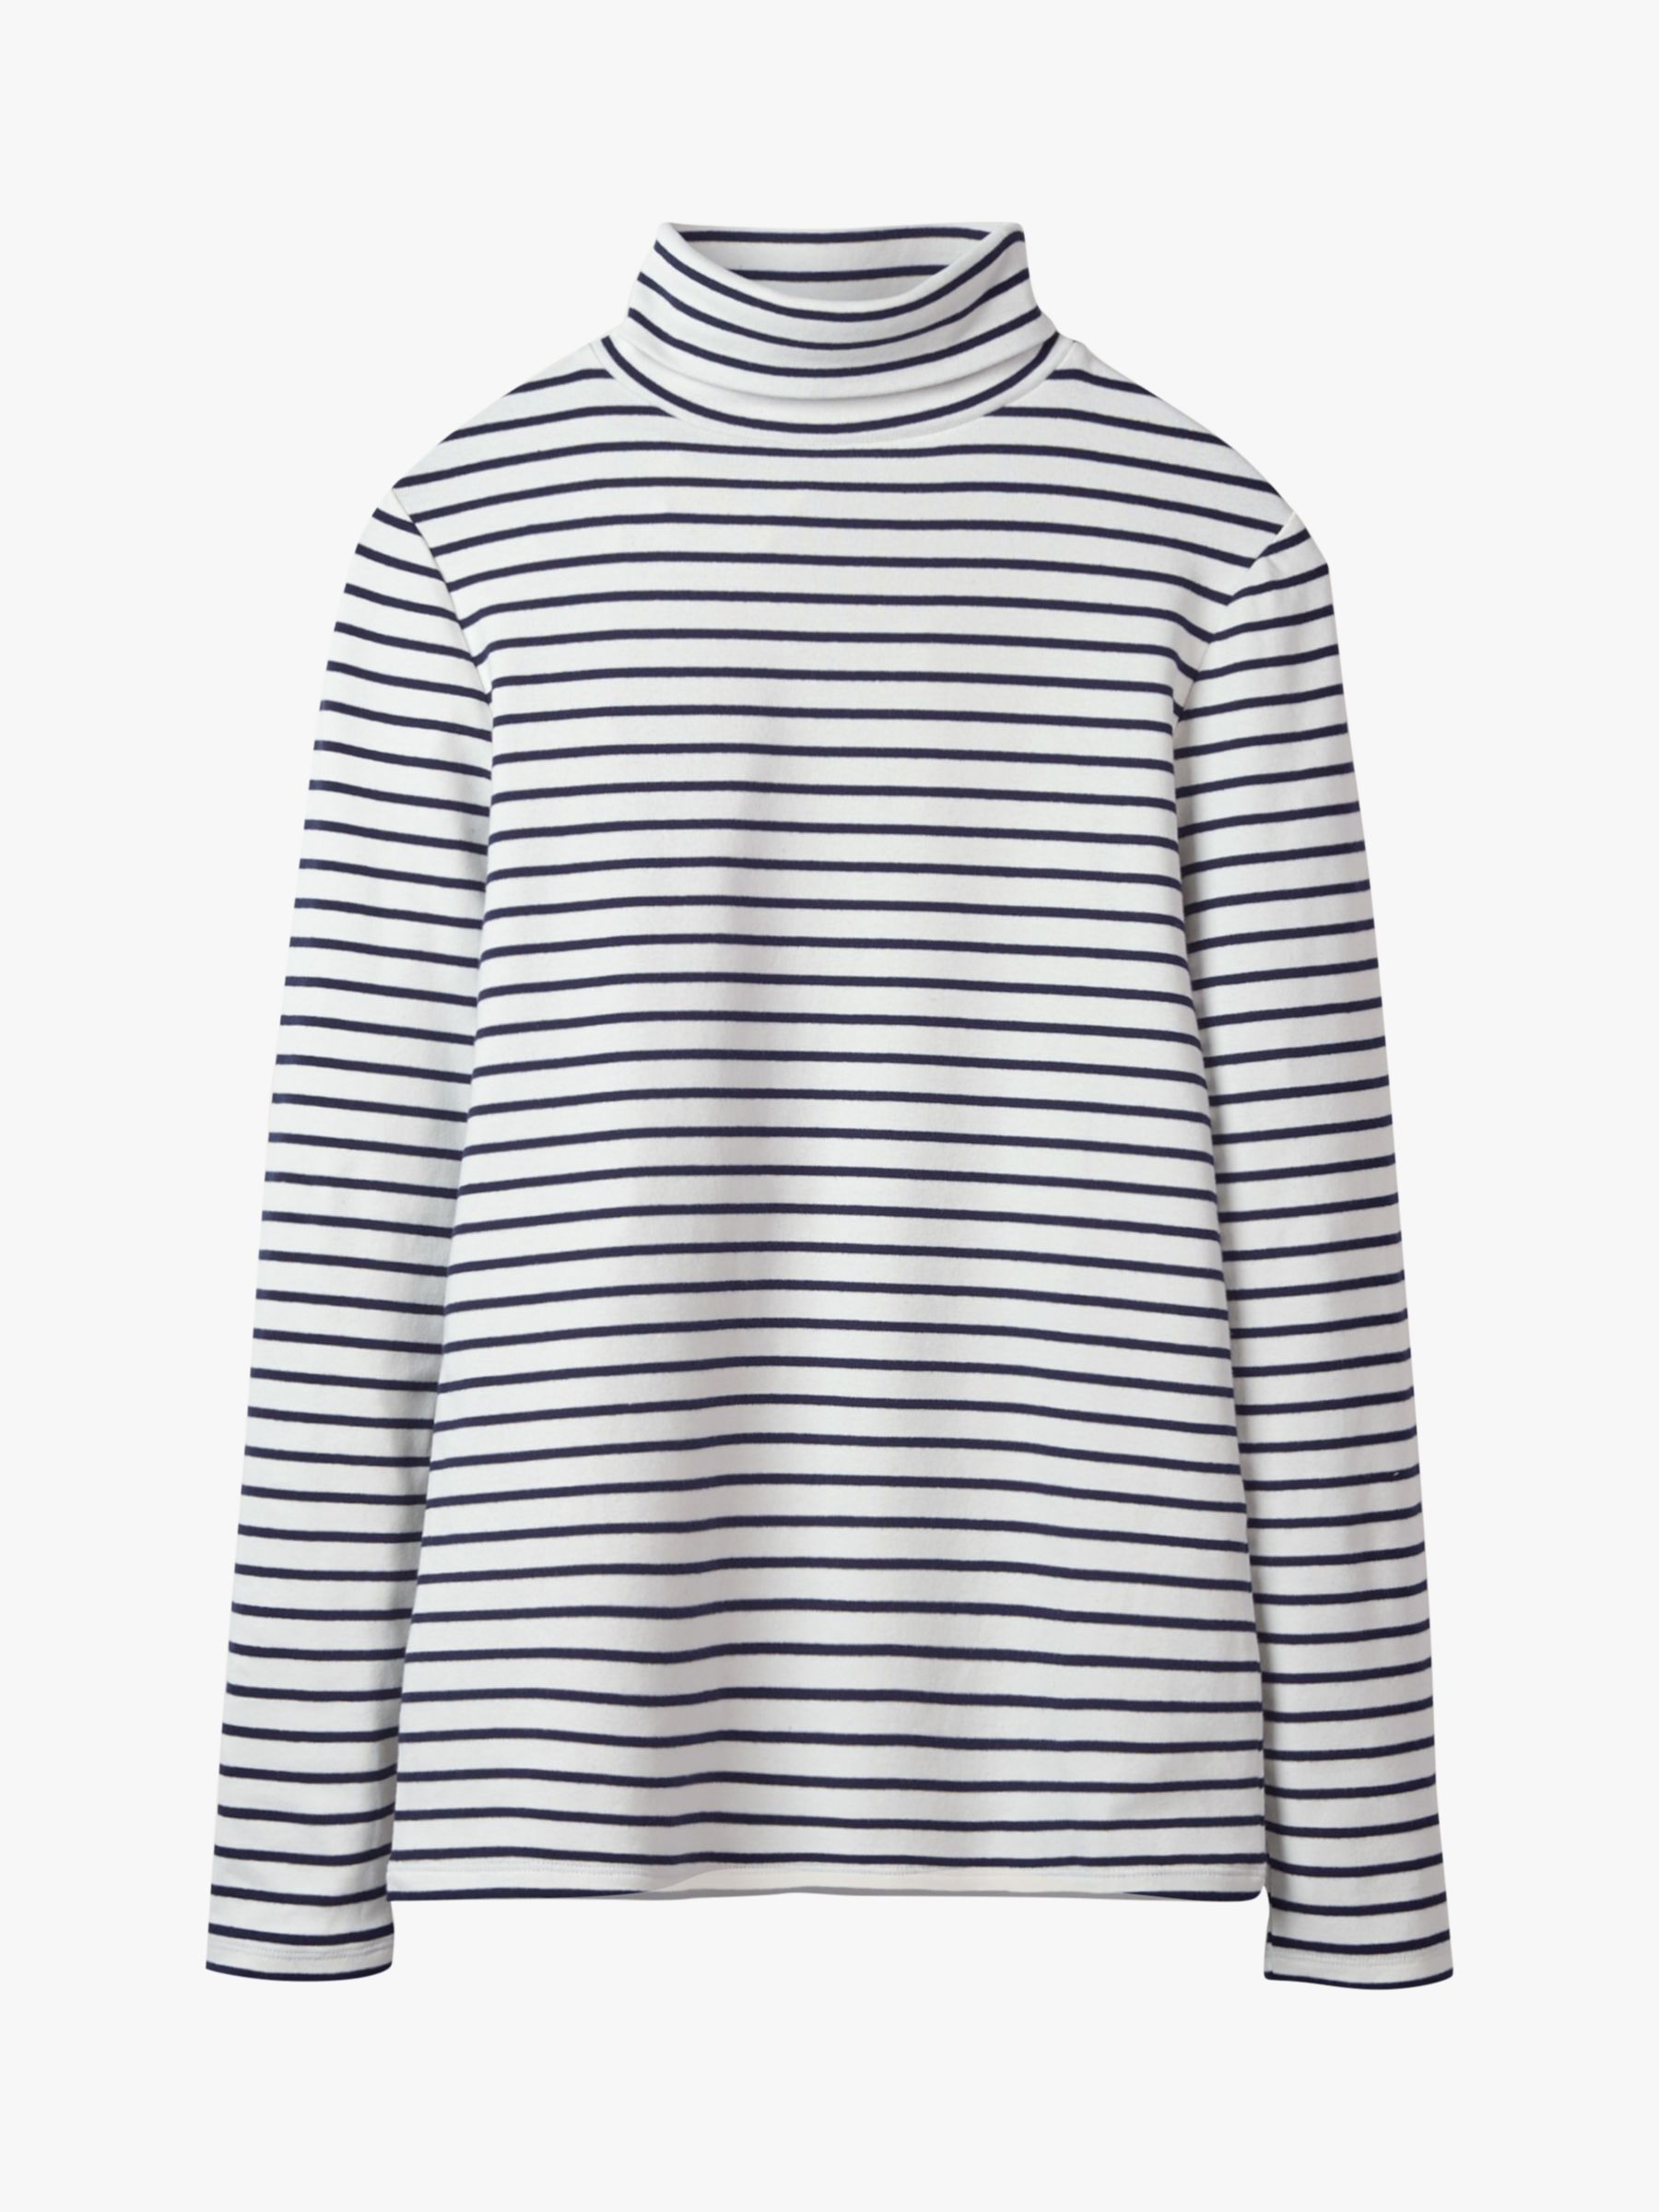 Boden Essential Stripe Roll Neck Top, Ivory/Navy at John Lewis & Partners